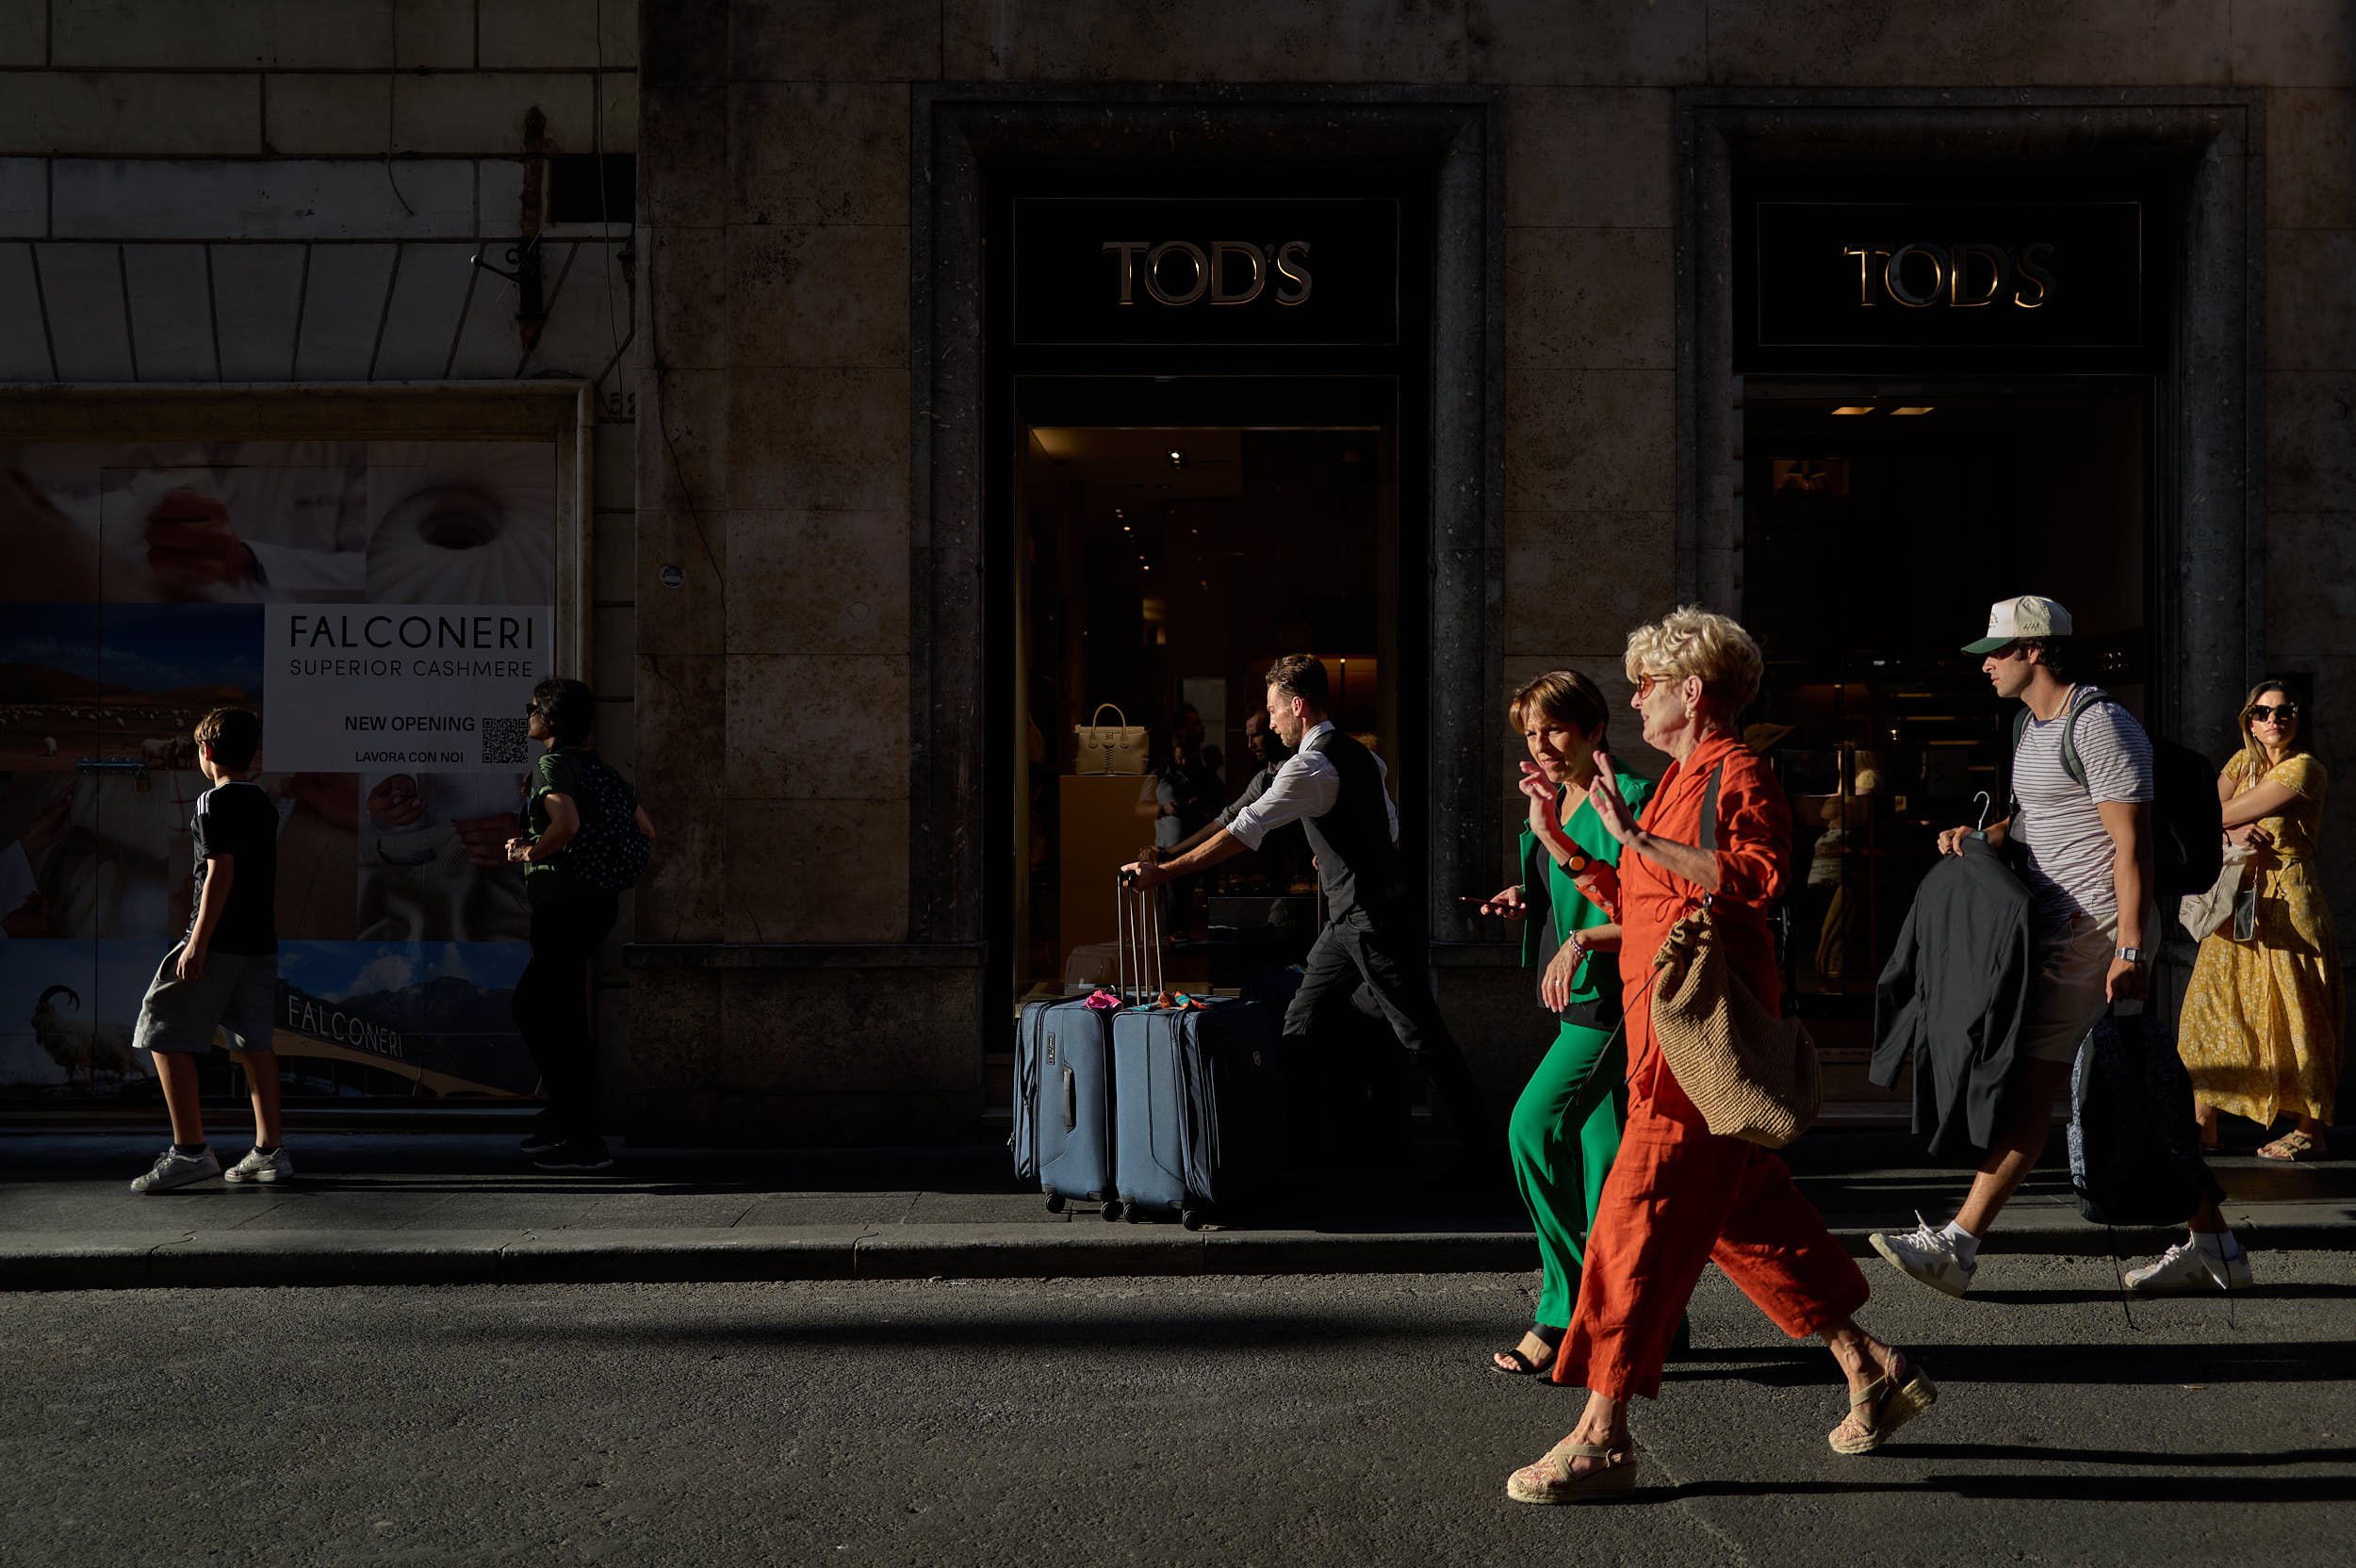 two elegant women walking at sunset in a street in Rome, a man walking with heavy bags in the background